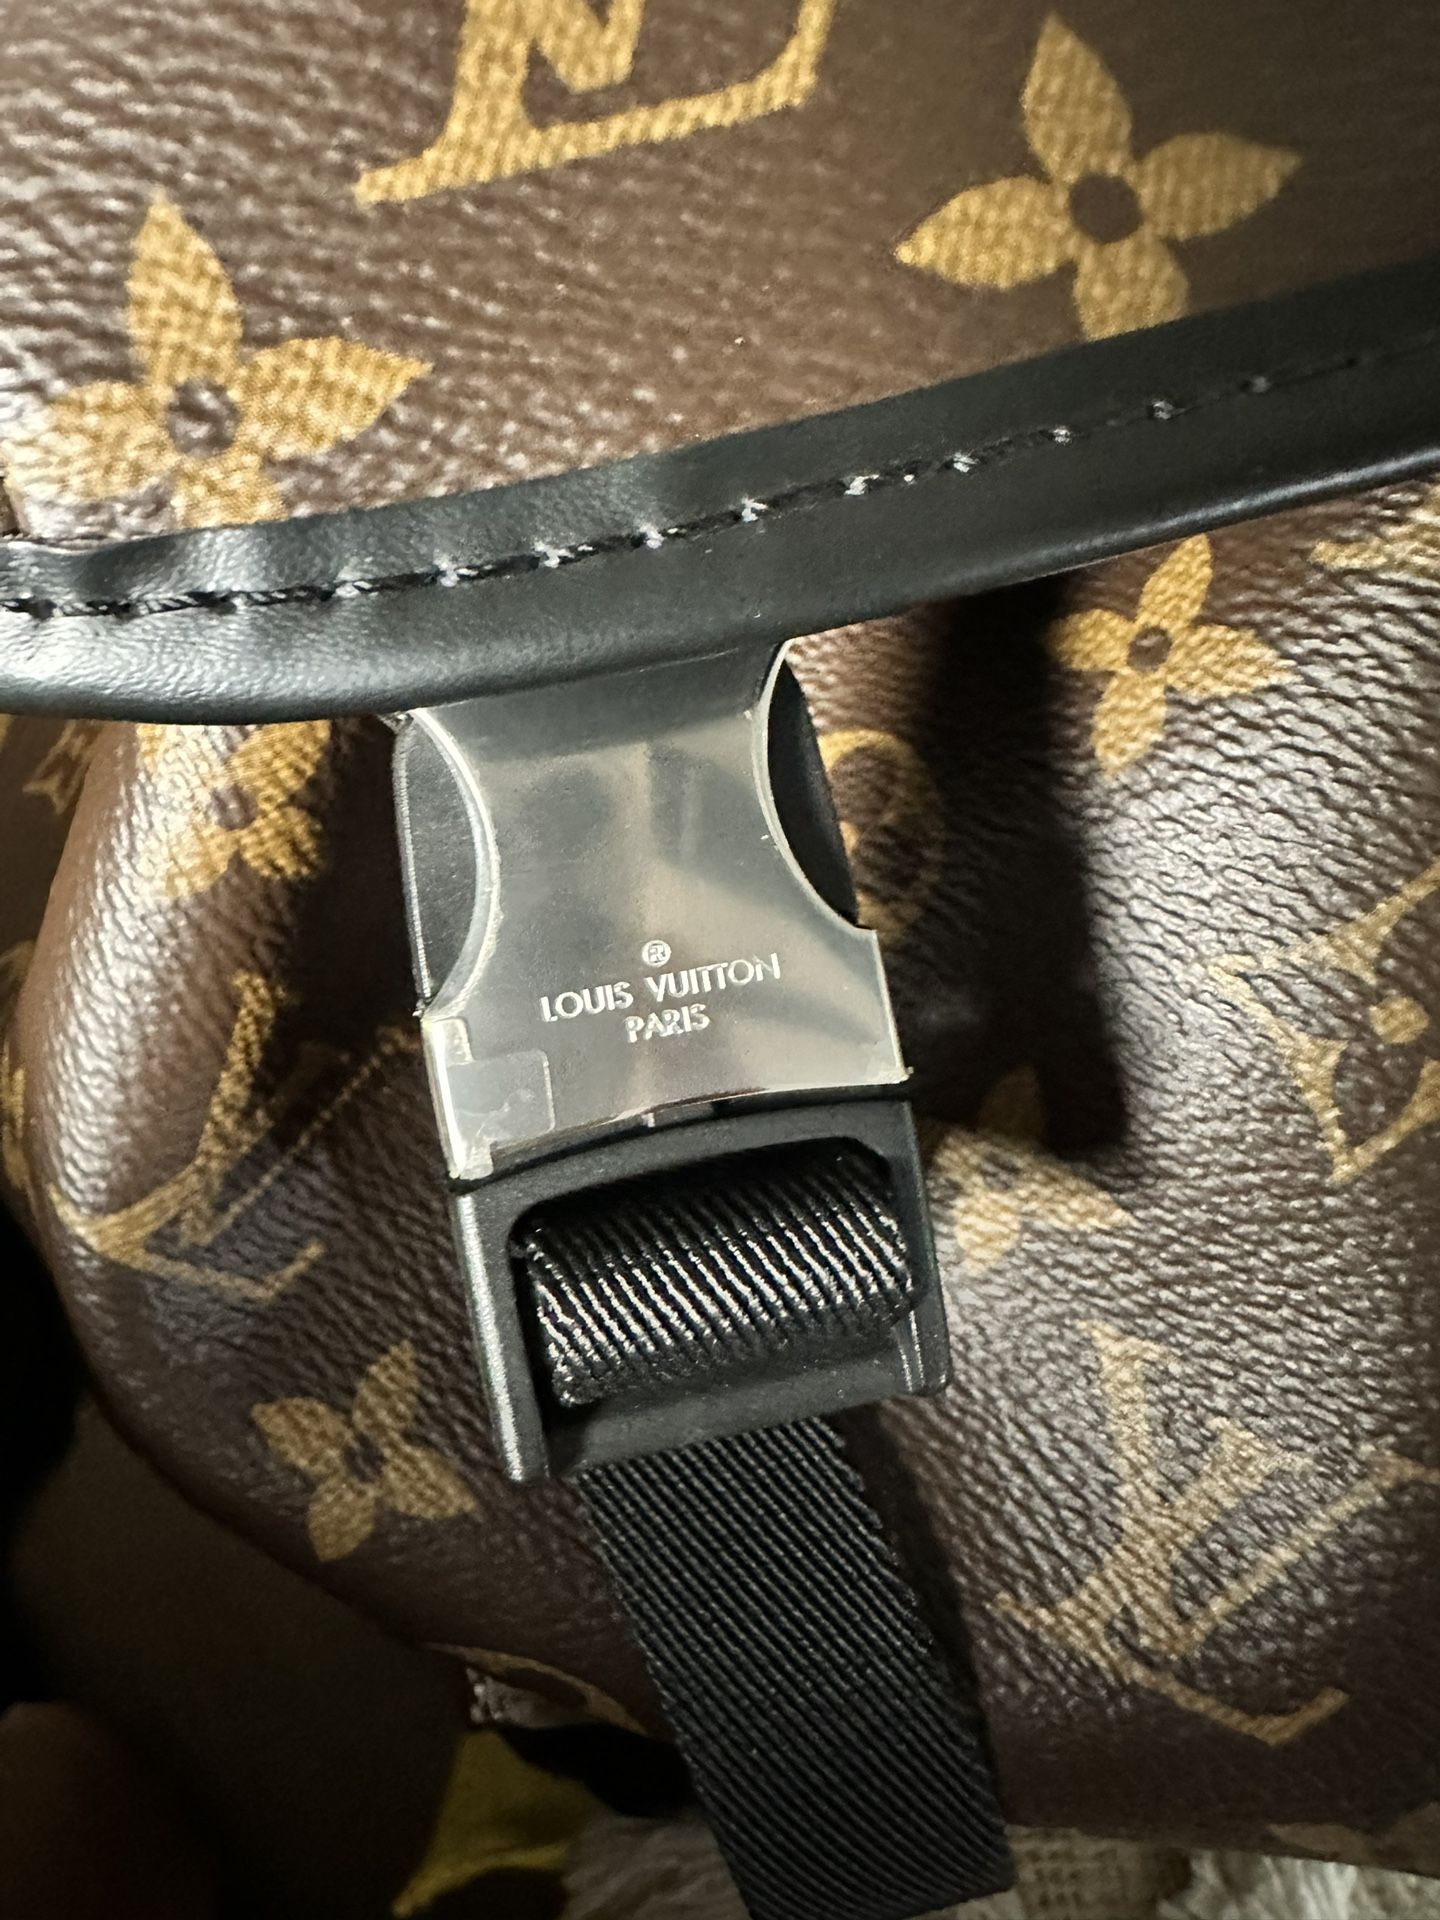 Louis Vuitton Zack Backpack bag for Sale in Renton, WA - OfferUp